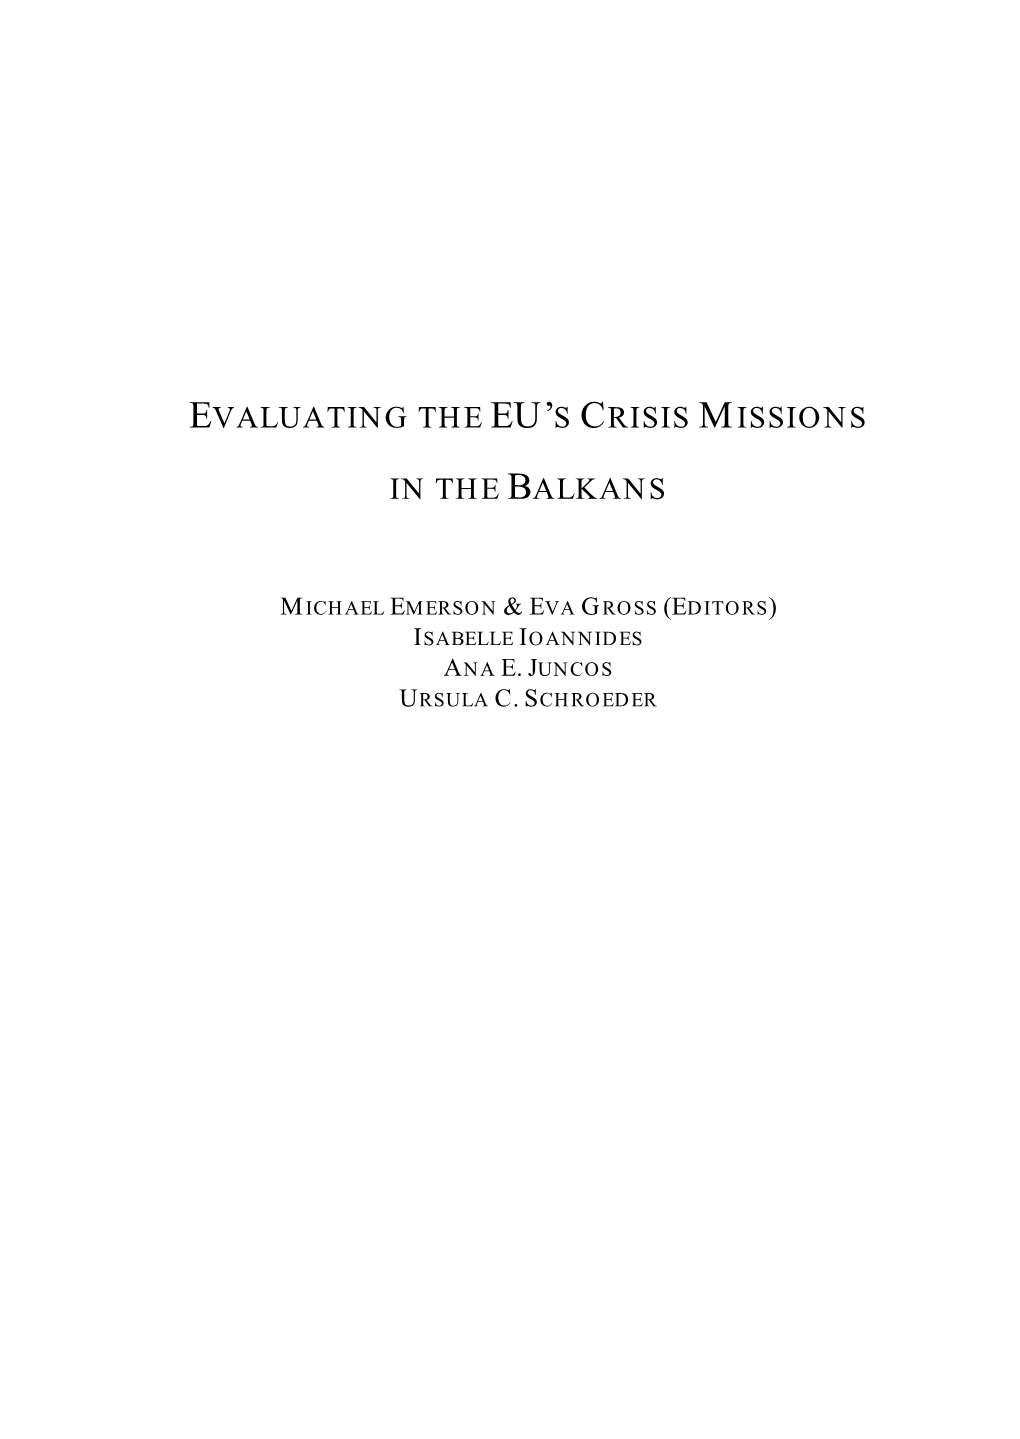 Evaluating the Eu's Crisis Missions in the Balkans